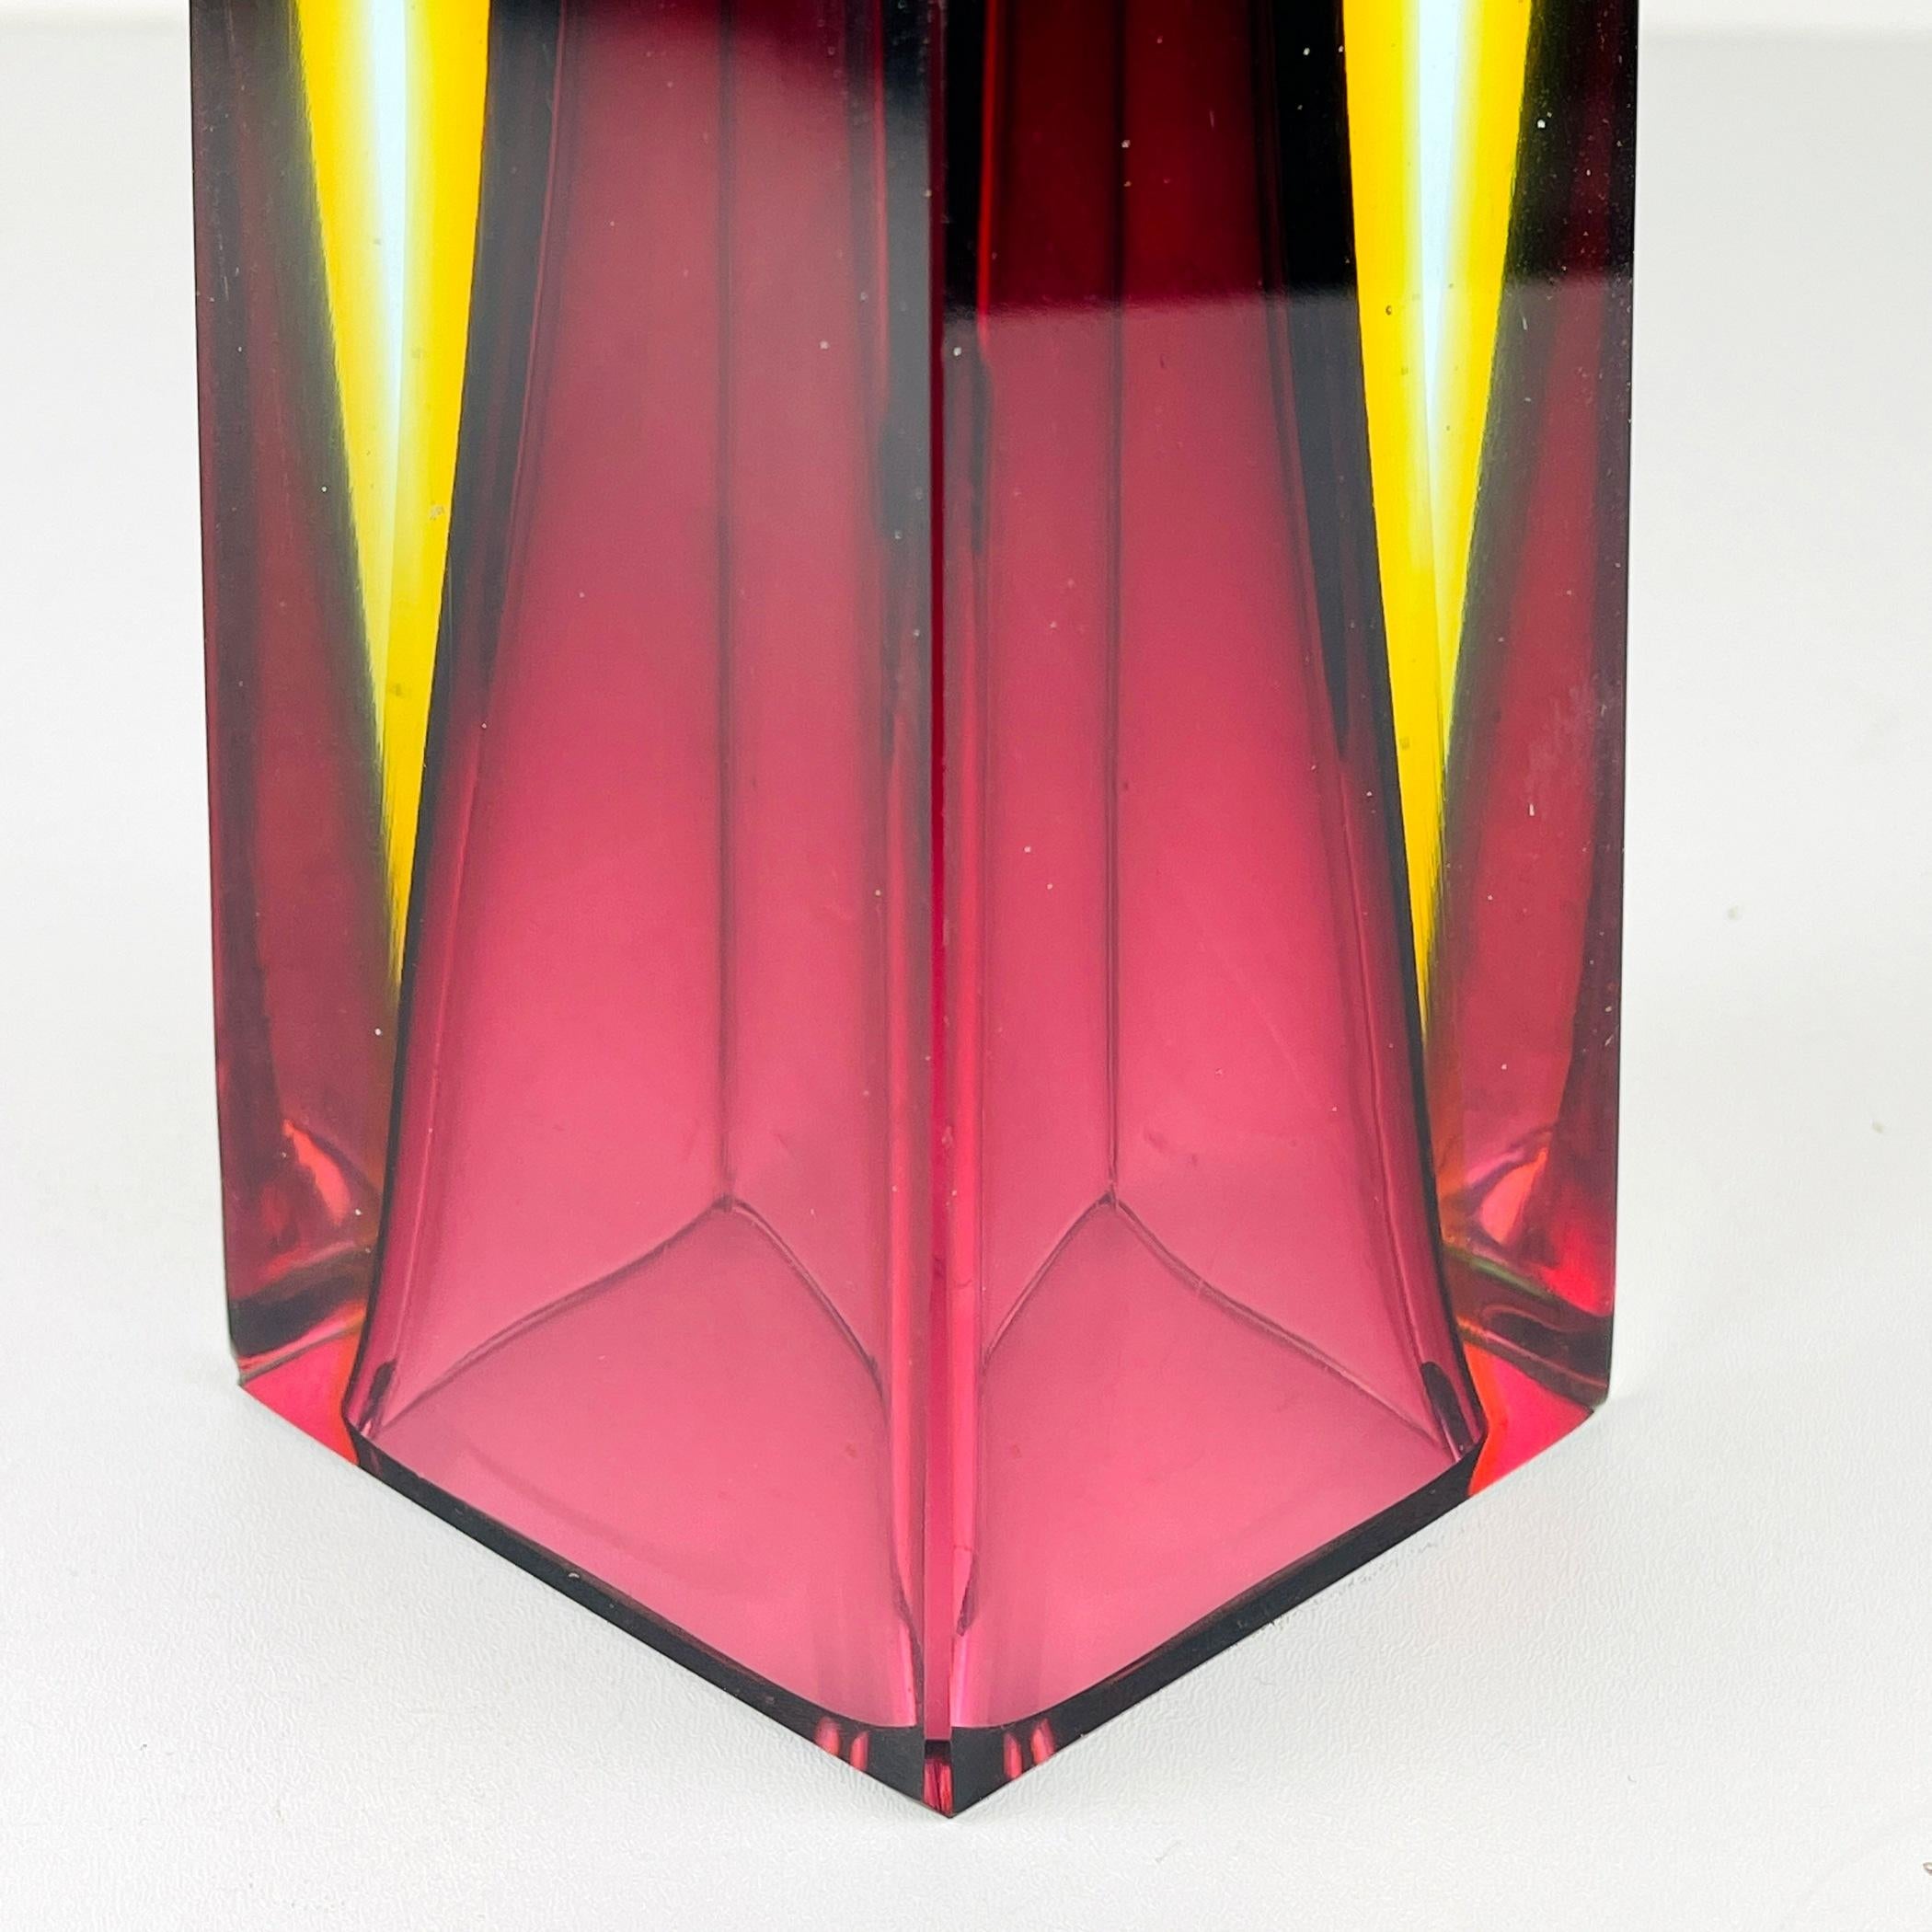 Sommerso Murano Glass Hand-Cut Vases by Alessandro Mandruzzato Italy 1970s For Sale 4